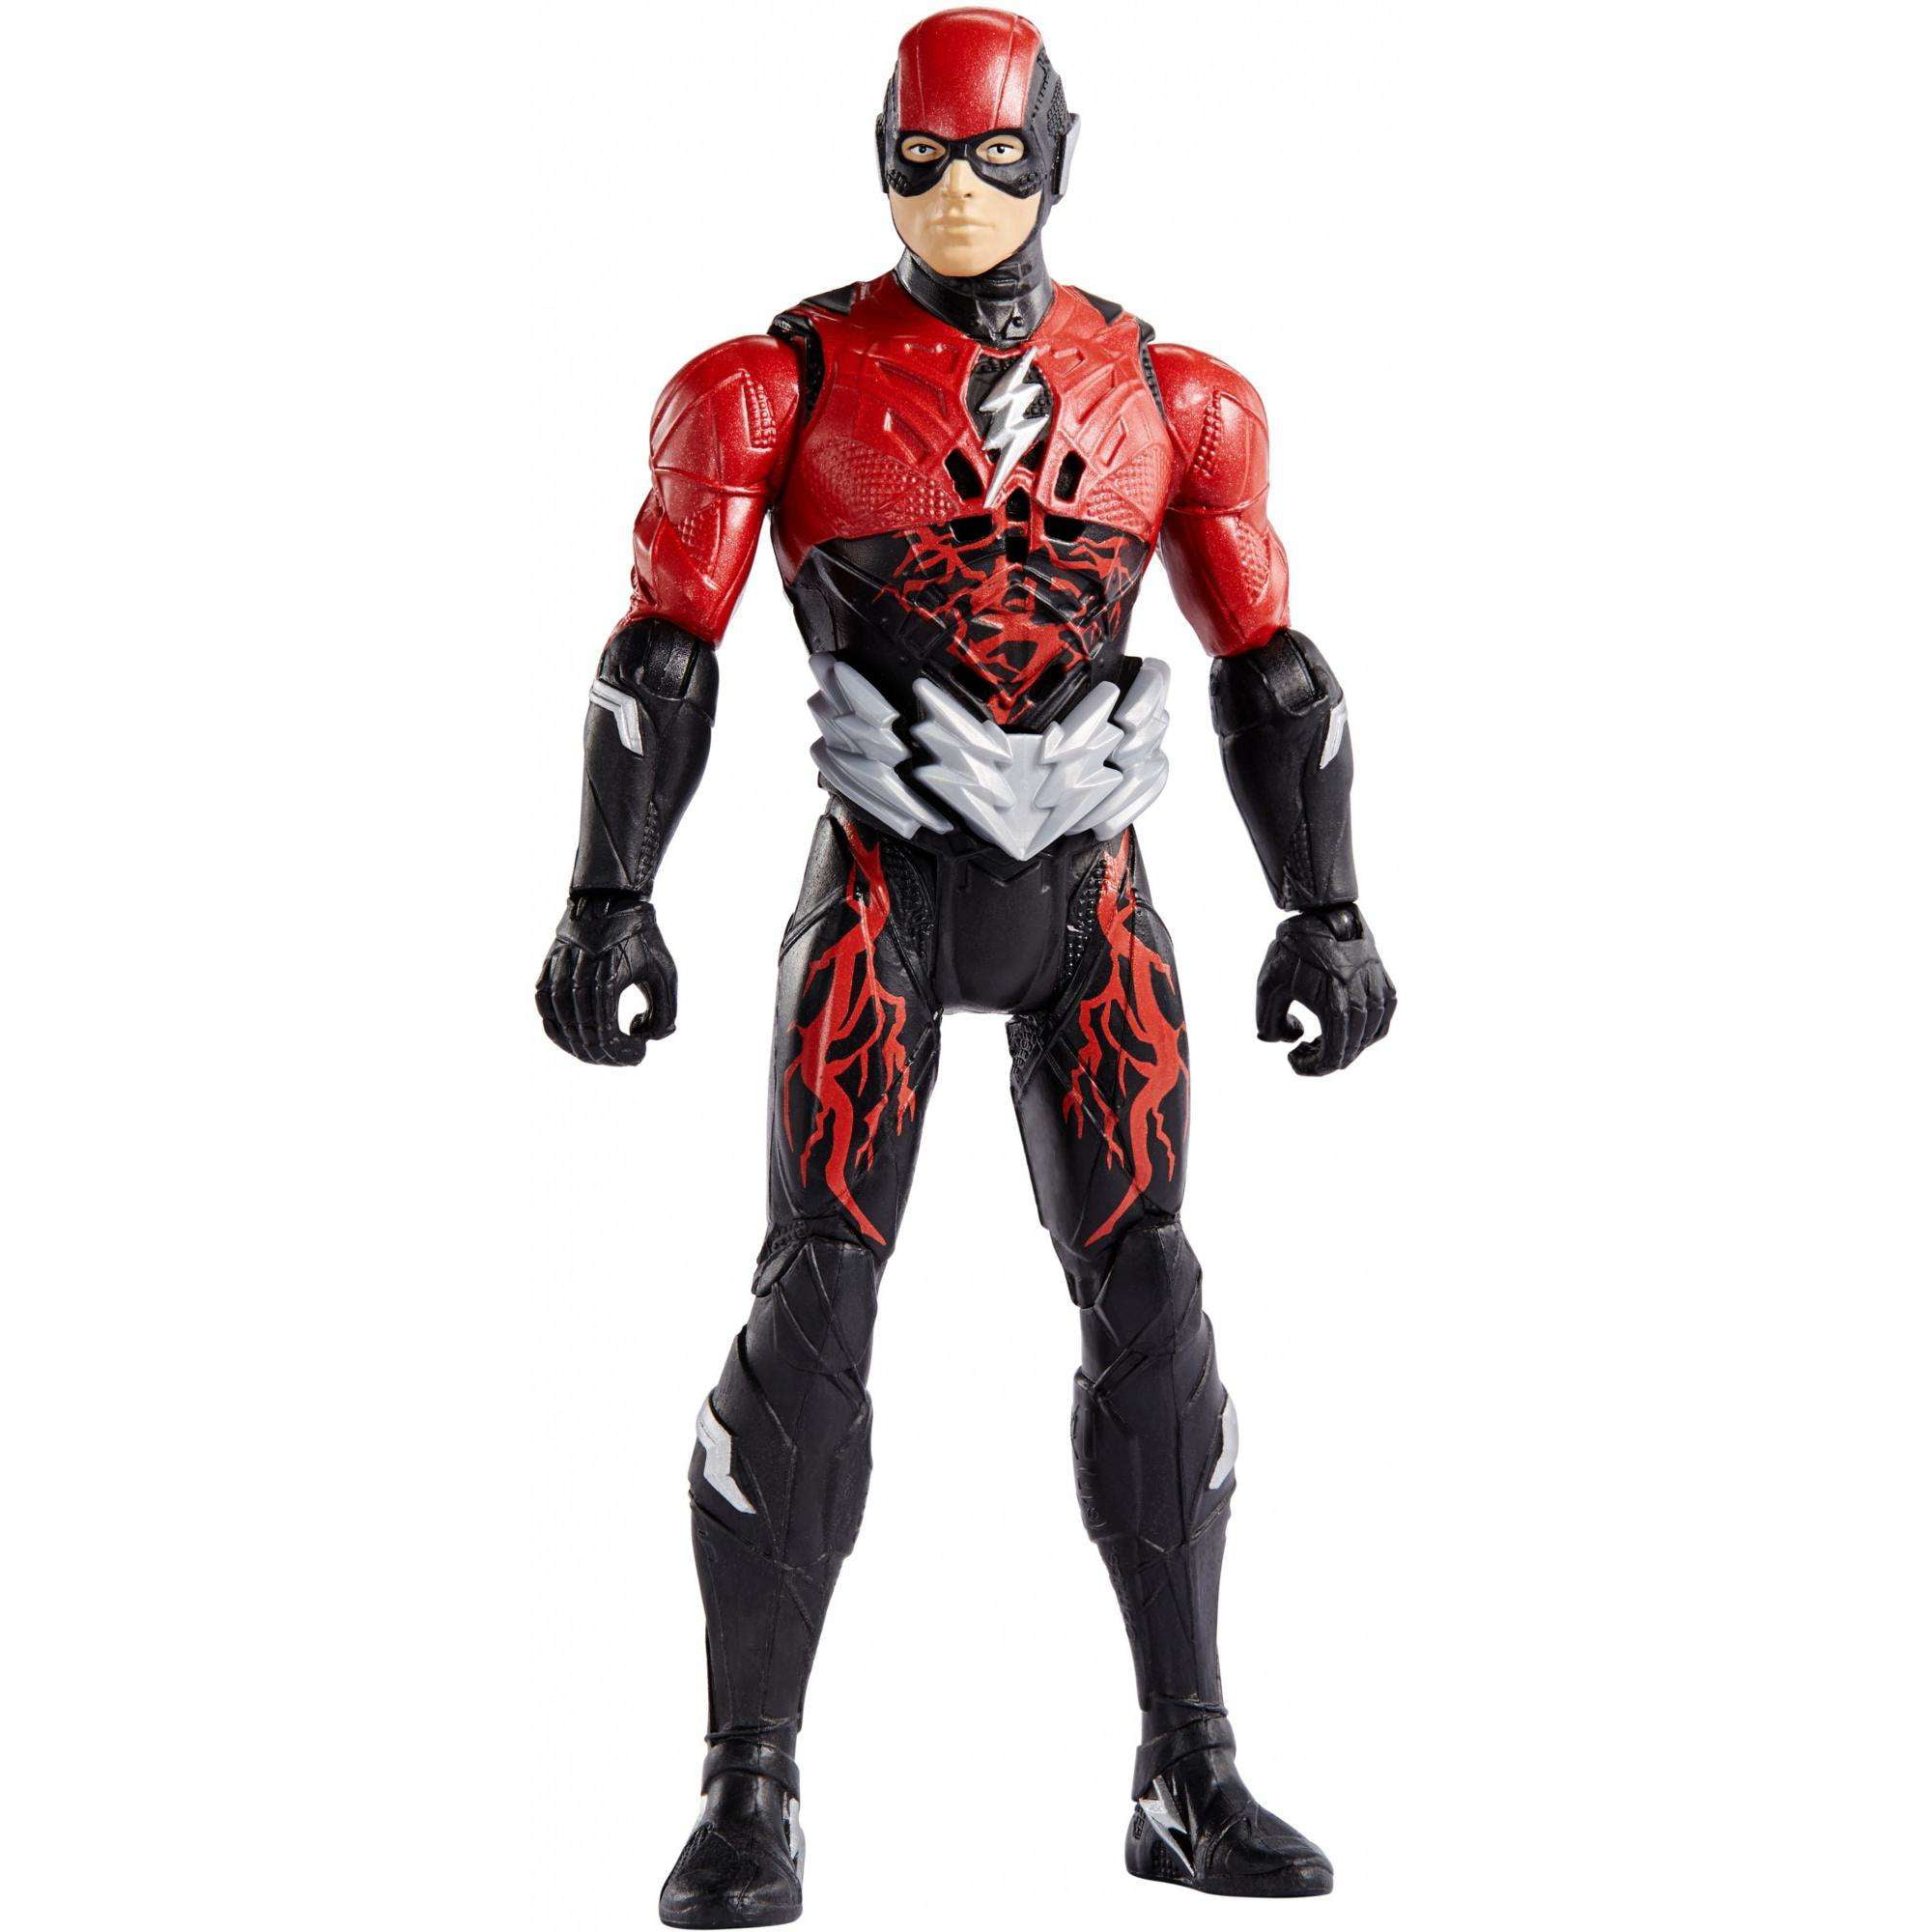 DC justice league Talking Heroes Stealth attaque CYBORG Figure 